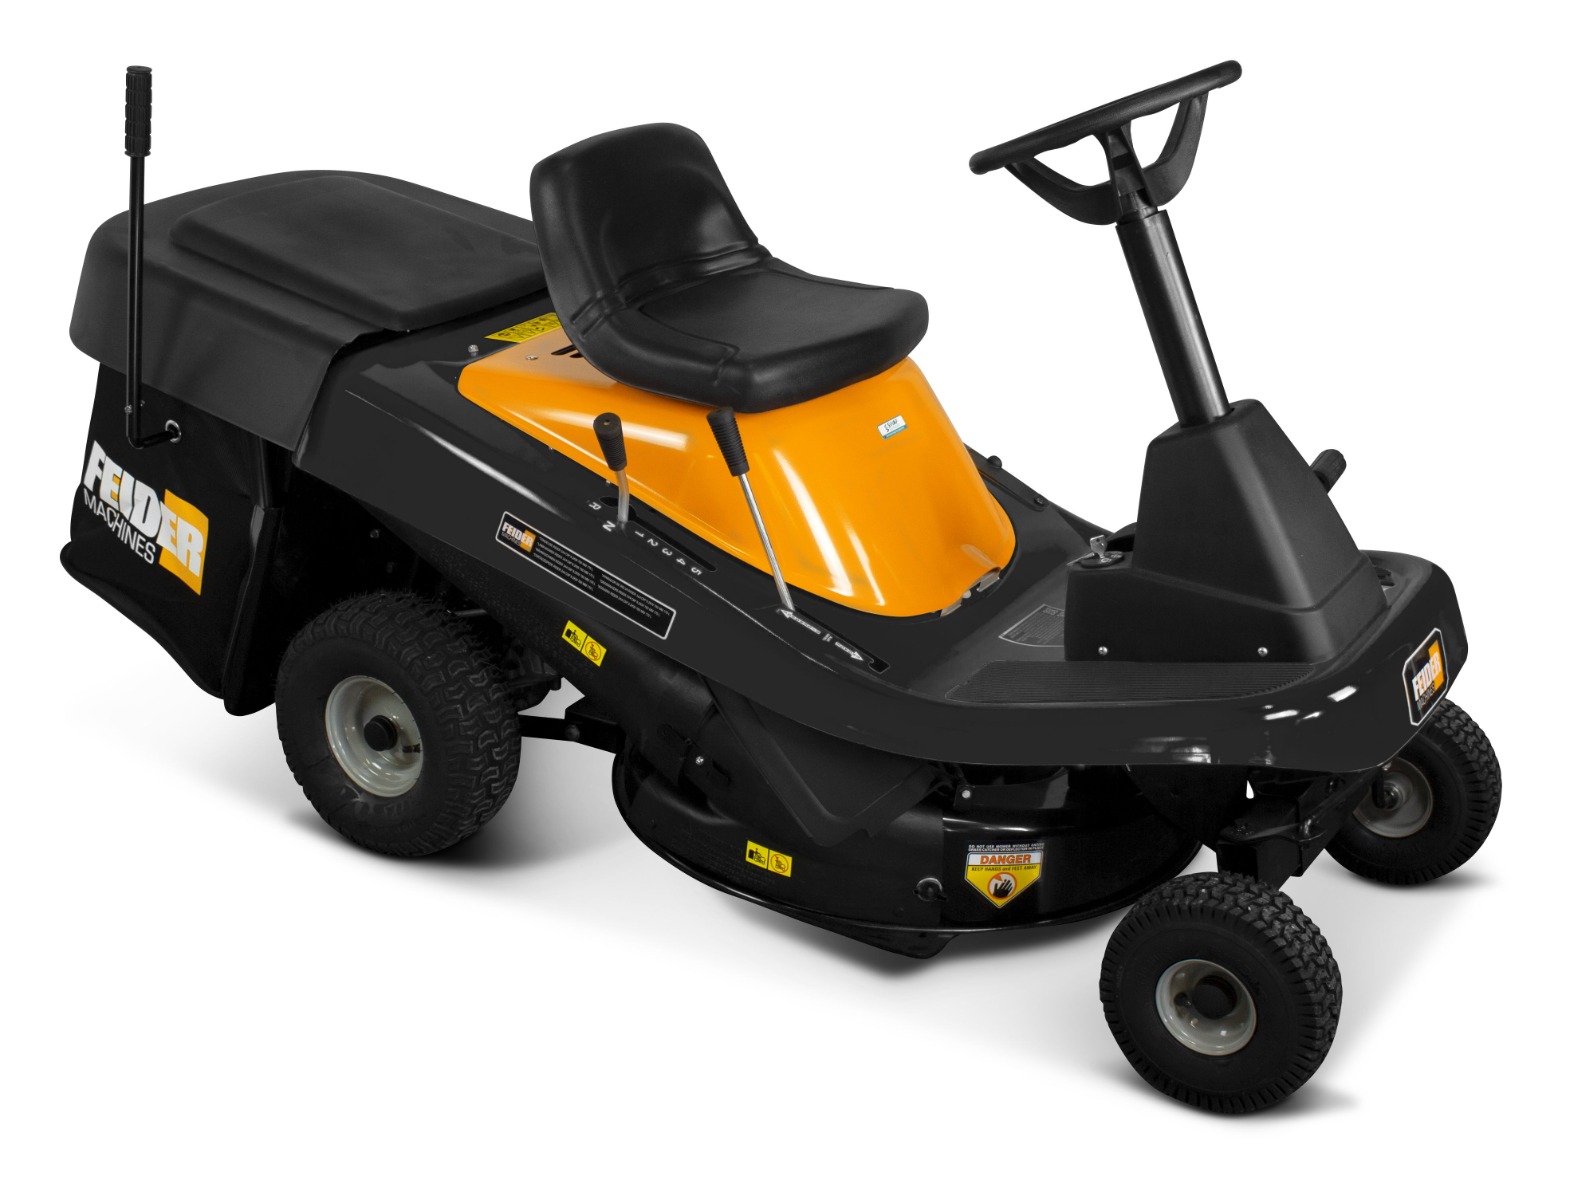 Feider FRT-7550M Compact Rear-Collect Ride-On Mower with Manual Drive